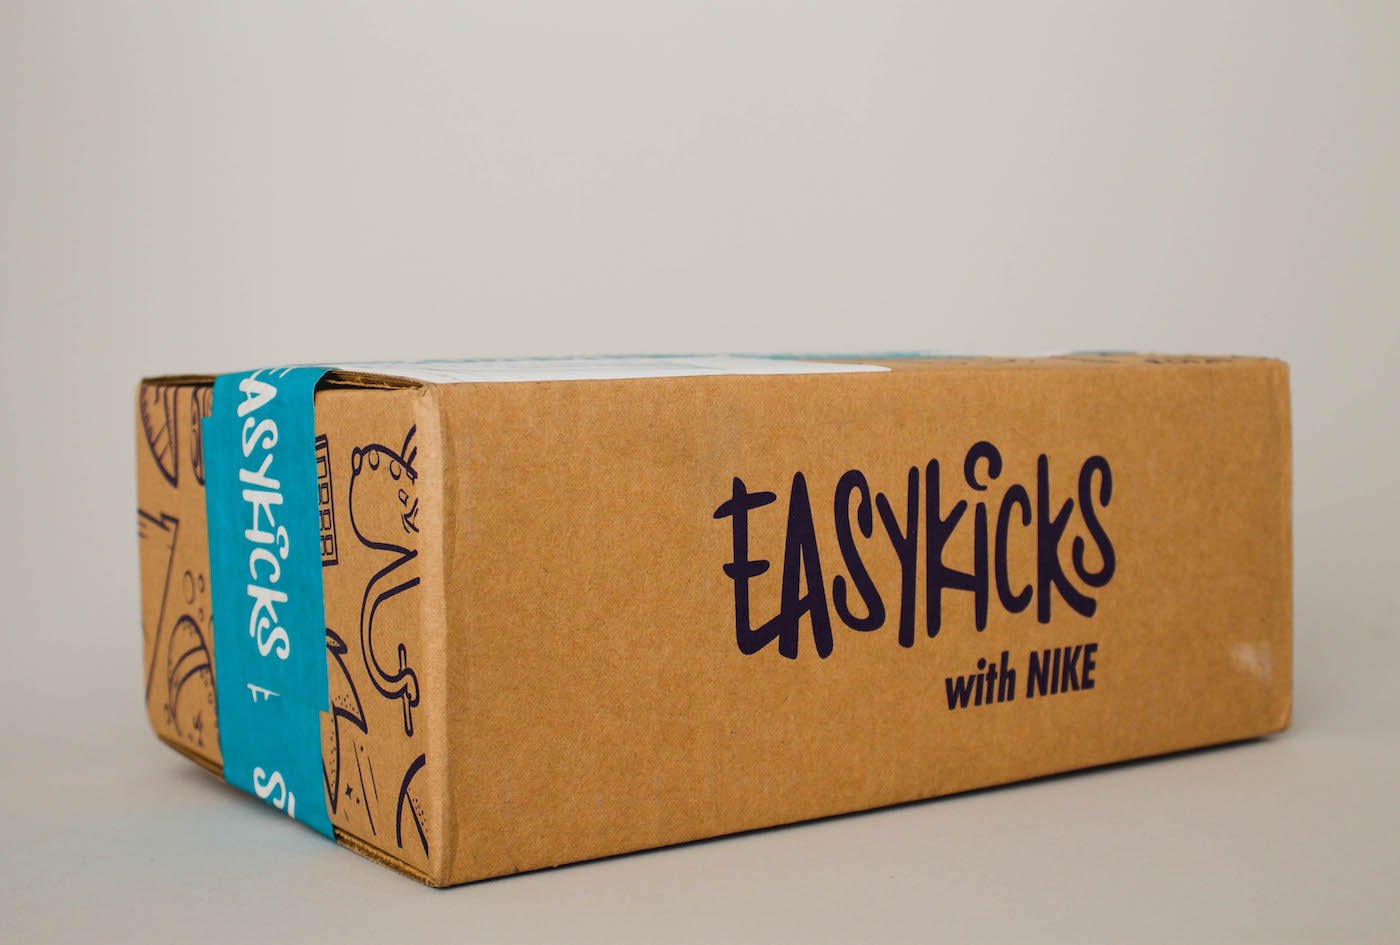 EasyKicks With Nike Kid’s Shoes Box Review – February 2018